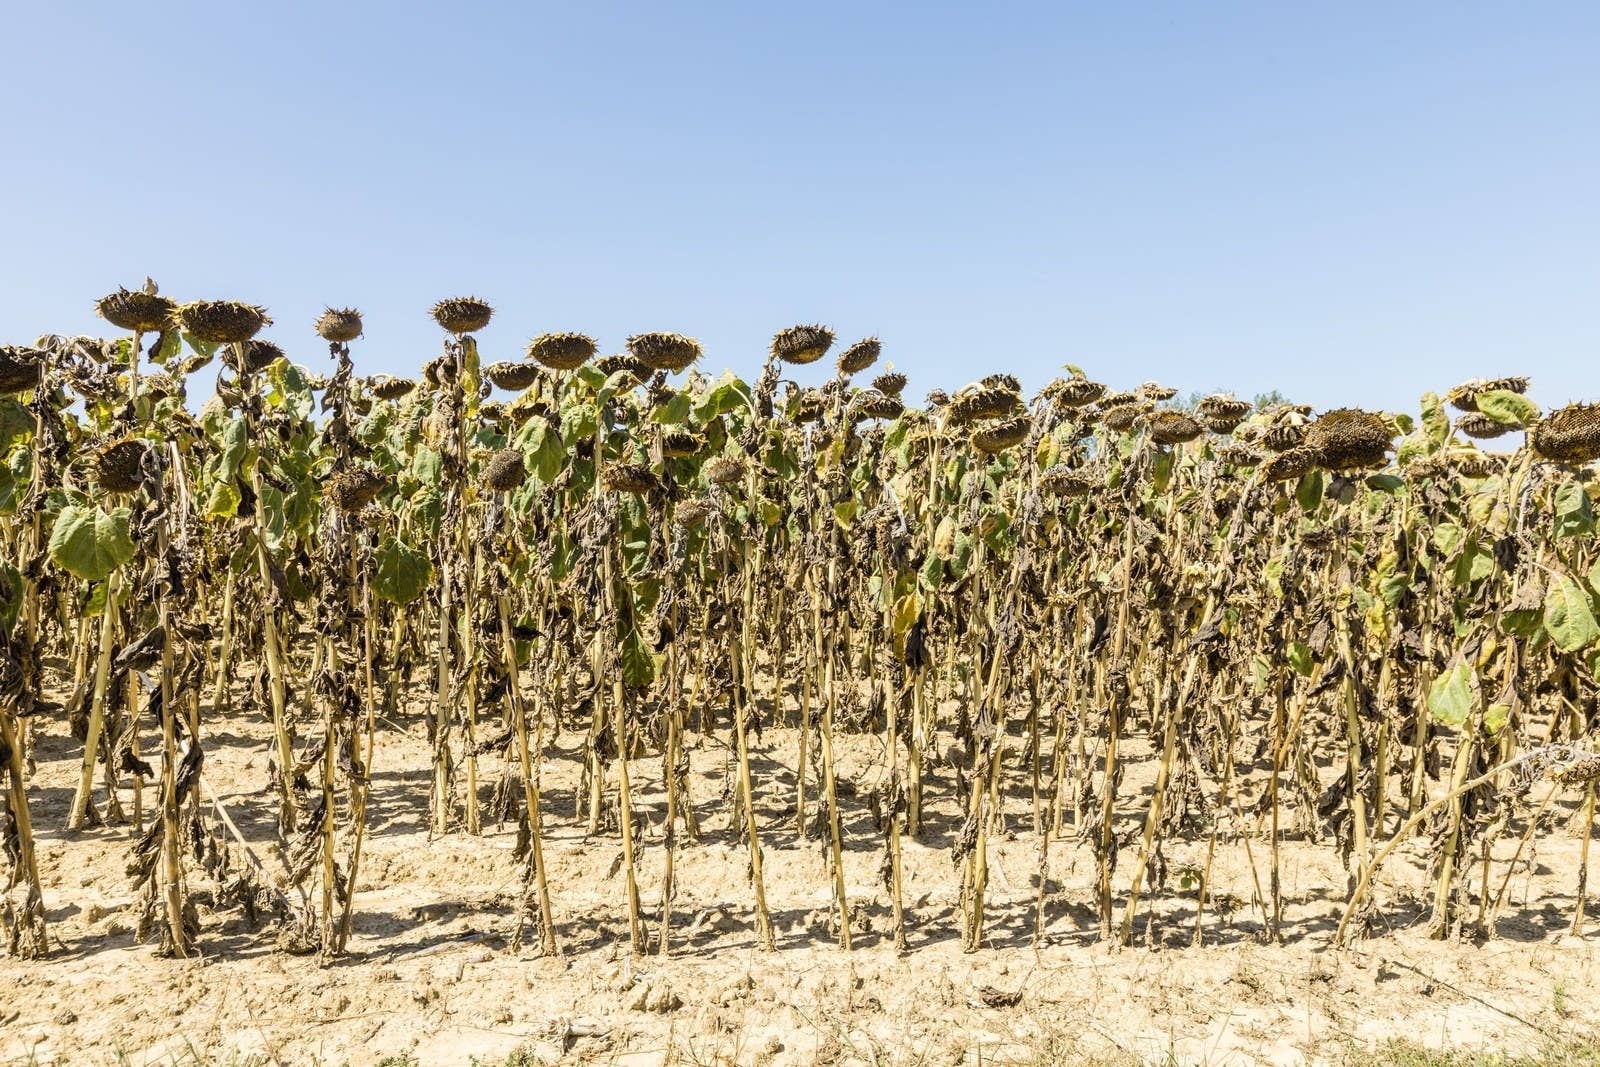 Dry sunflower plants in a field near Lyon, France, affected by drought during a heat wave on Aug. 20.